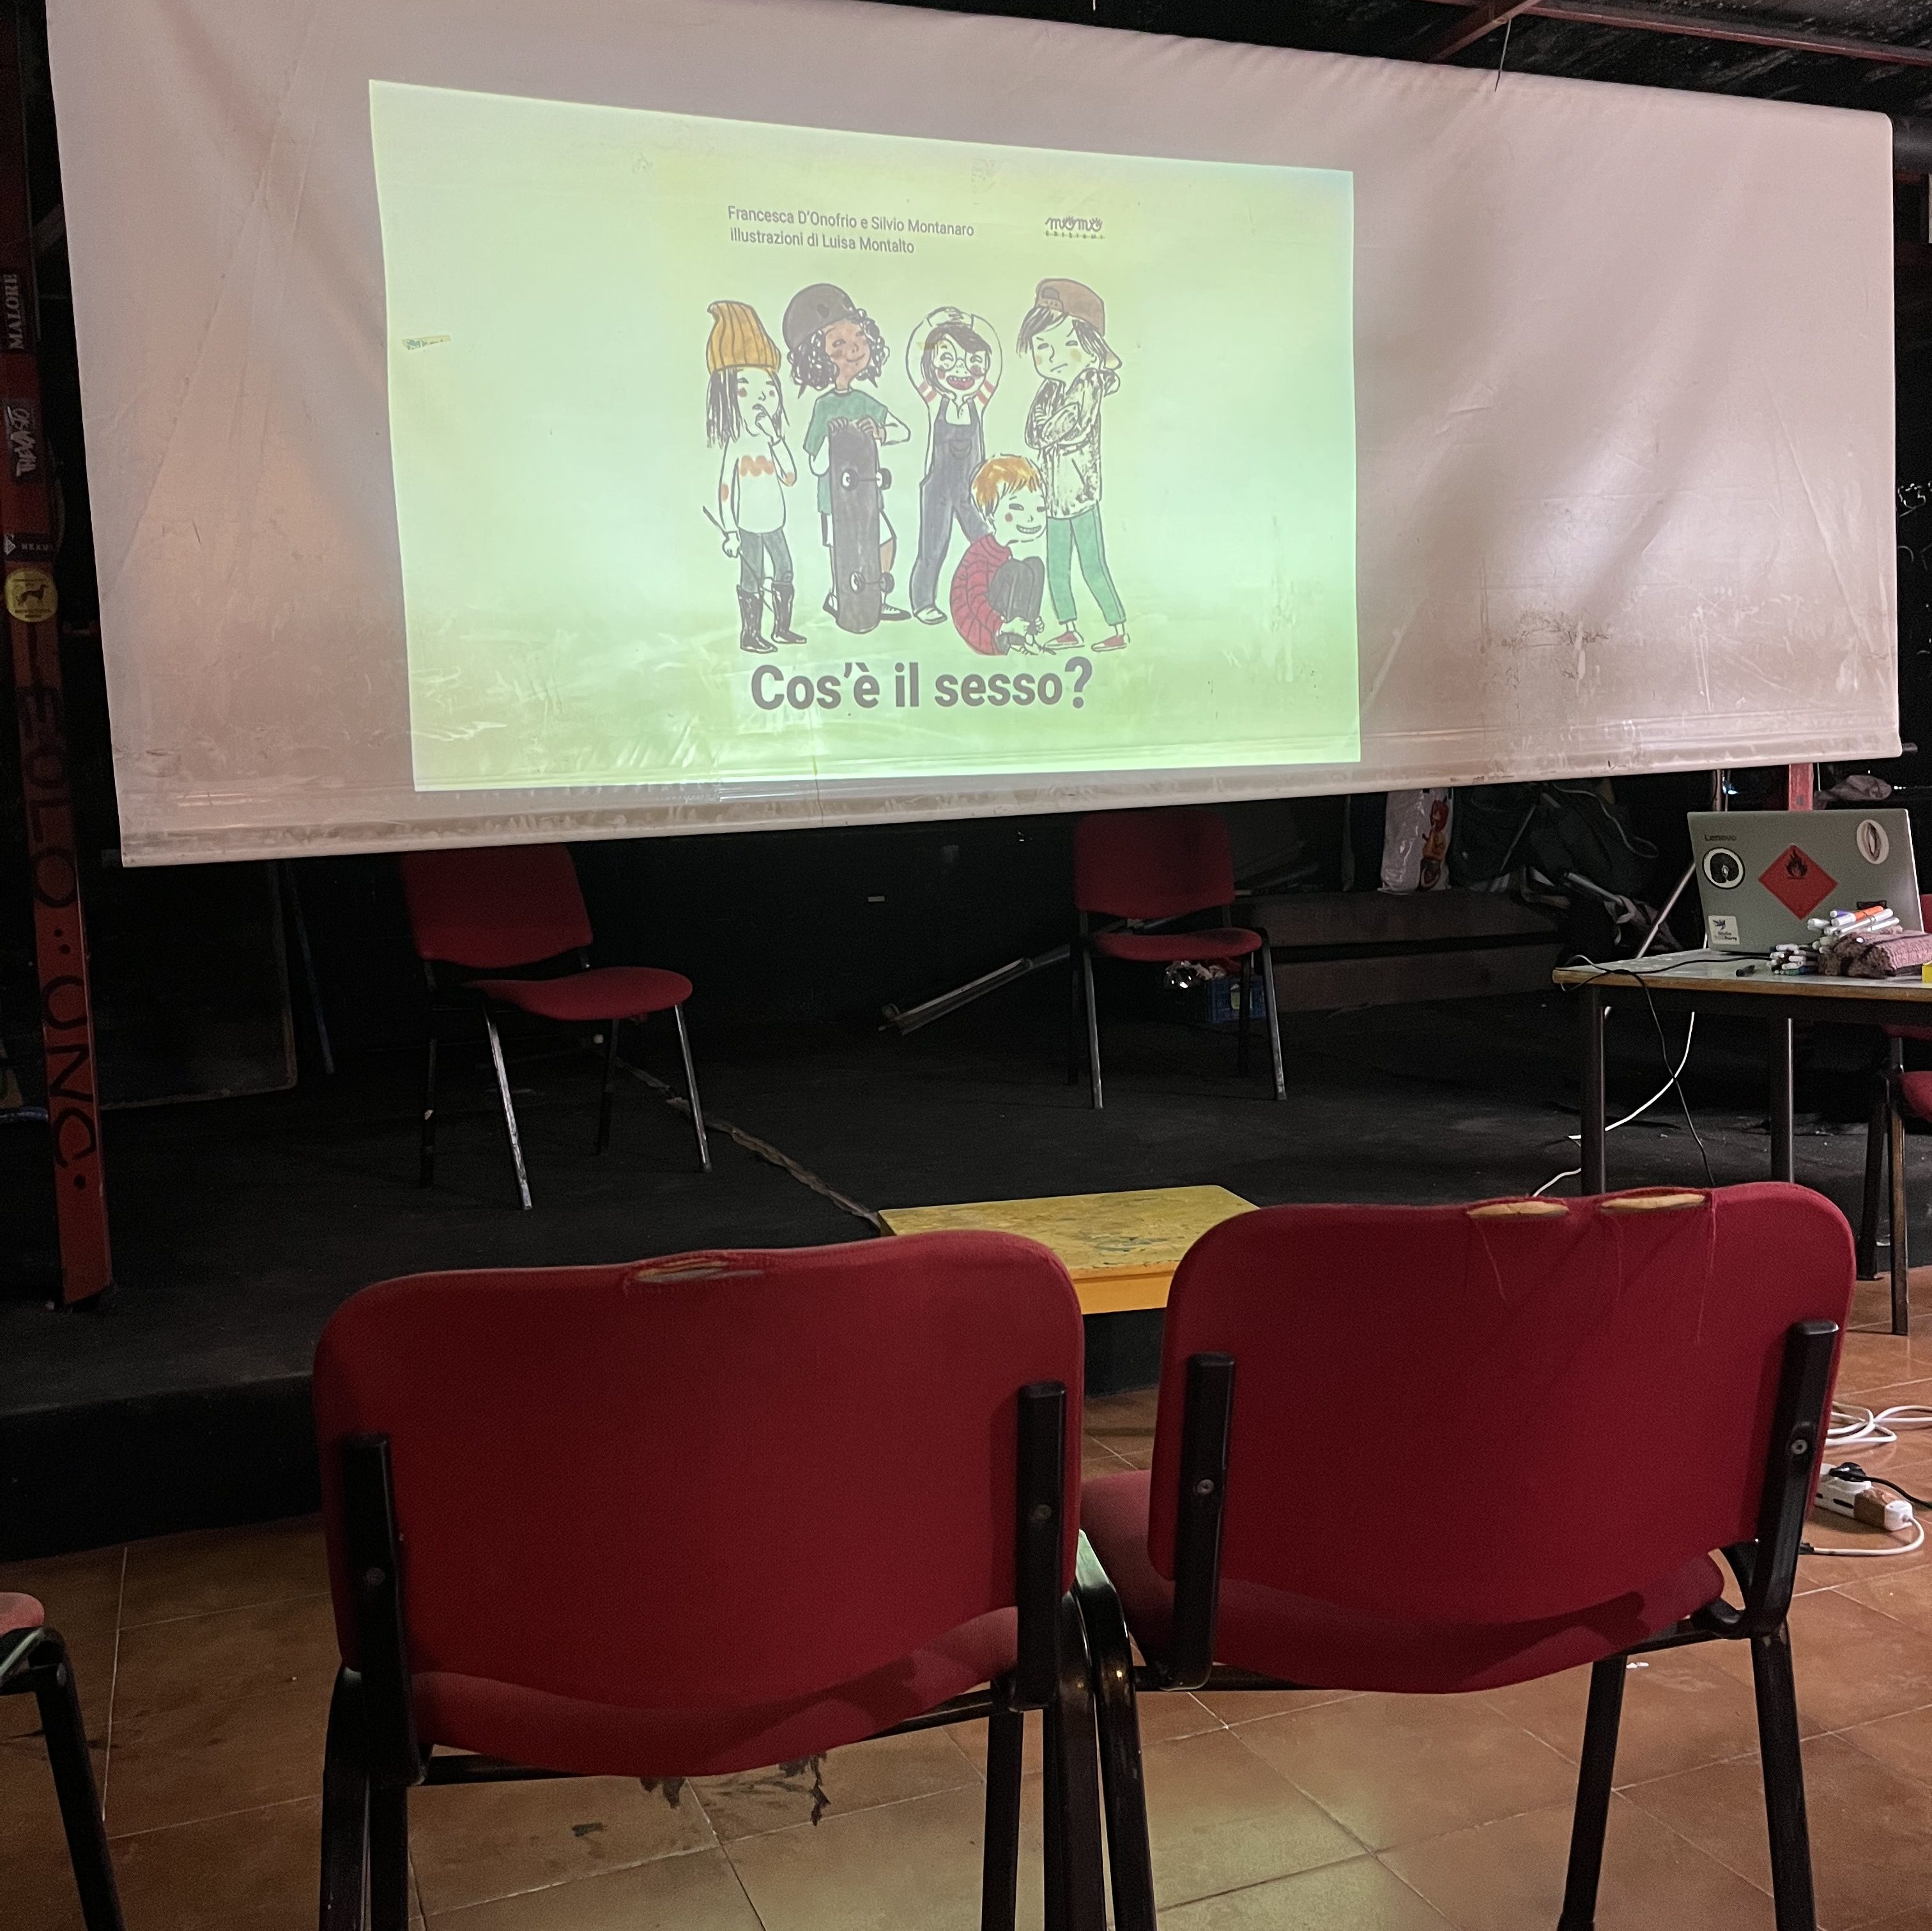 Photo shows presentation screen for the book 'What is sex'. On the presentation screen, the front cover of the text is visible. Front cover depicts 5 illustrated children and teenagers who have various appearances, hobbies and expressions. Below the children are the words 'cos'è il sesso?' or what is sex in Italian.